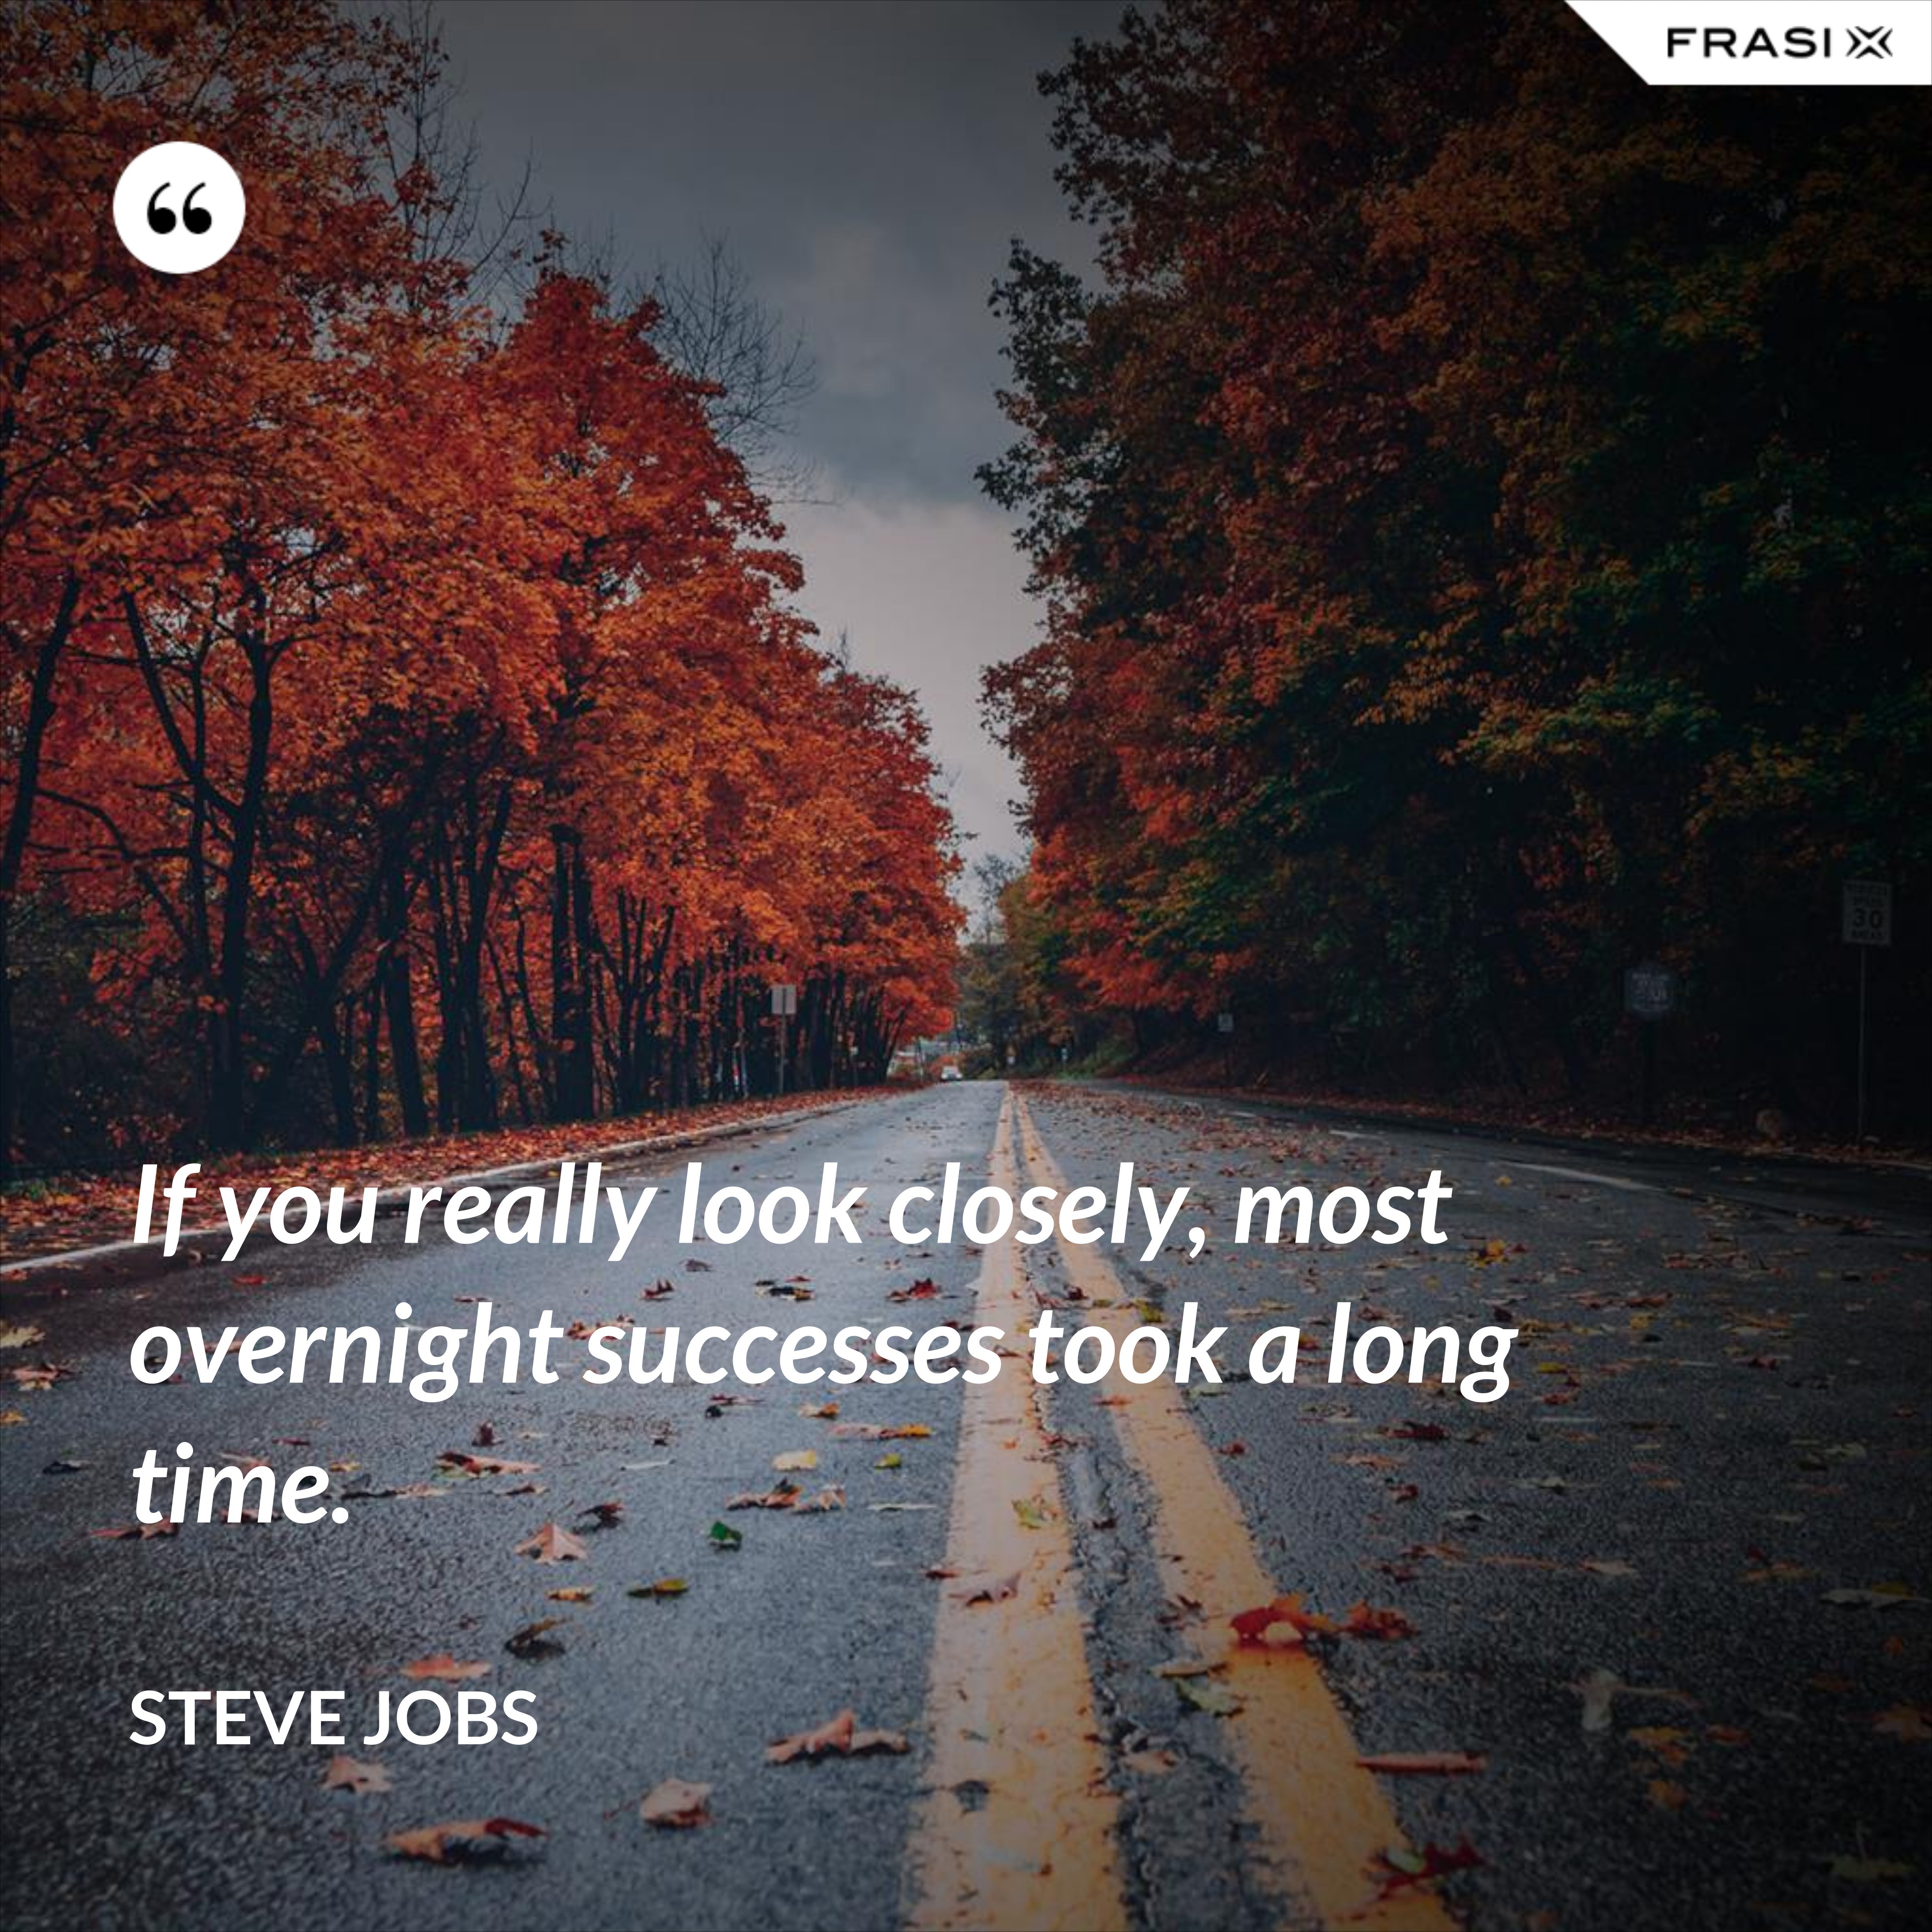 If you really look closely, most overnight successes took a long time. - Steve Jobs